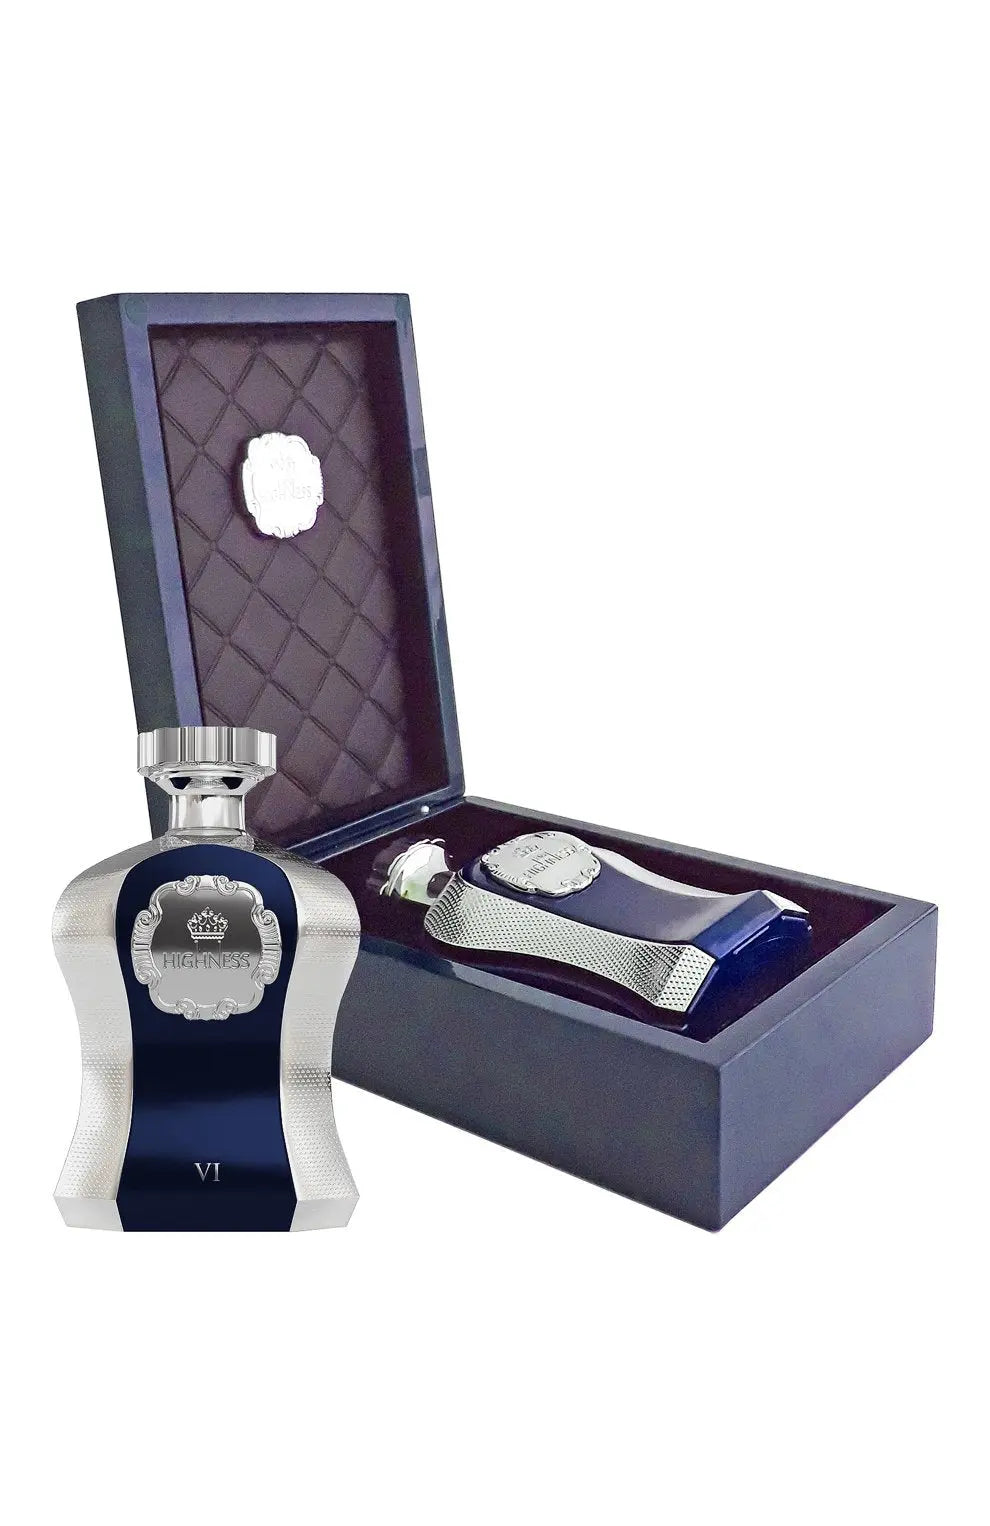 The image showcases an elegant perfume set which includes a luxurious bottle of "Highness VI" fragrance and a matching accessory. The perfume bottle is designed with a deep blue color in the center bordered by textured silver sides, topped with a polished silver cap. It is placed inside an open, dark-colored presentation box with a quilted interior, enhancing the product's opulence. The box and the bottle both feature the "Highness" insignia, signifying a royal and exquisite scent profile.